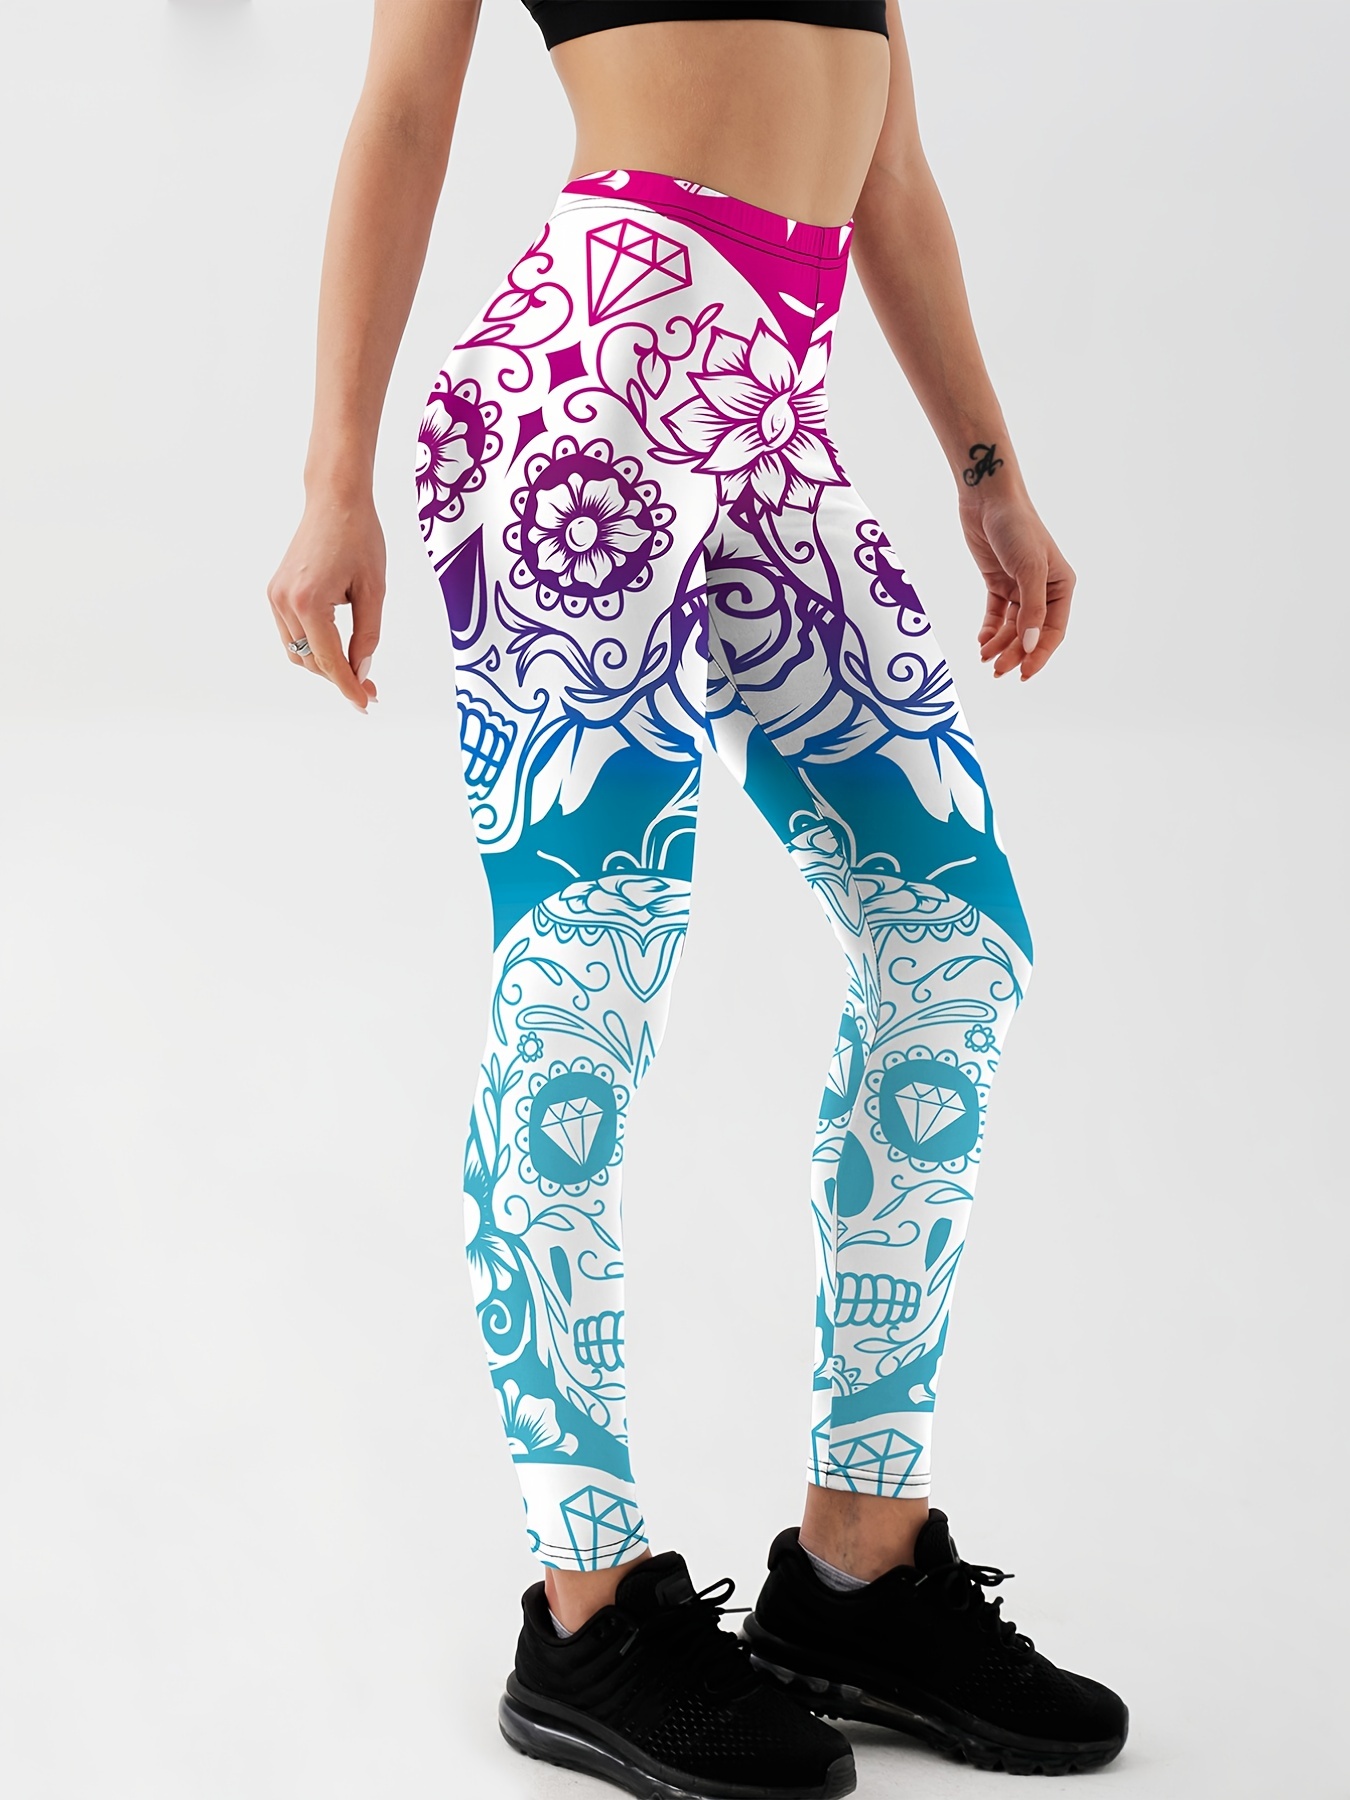 Time and Tru Floral Athletic Leggings for Women